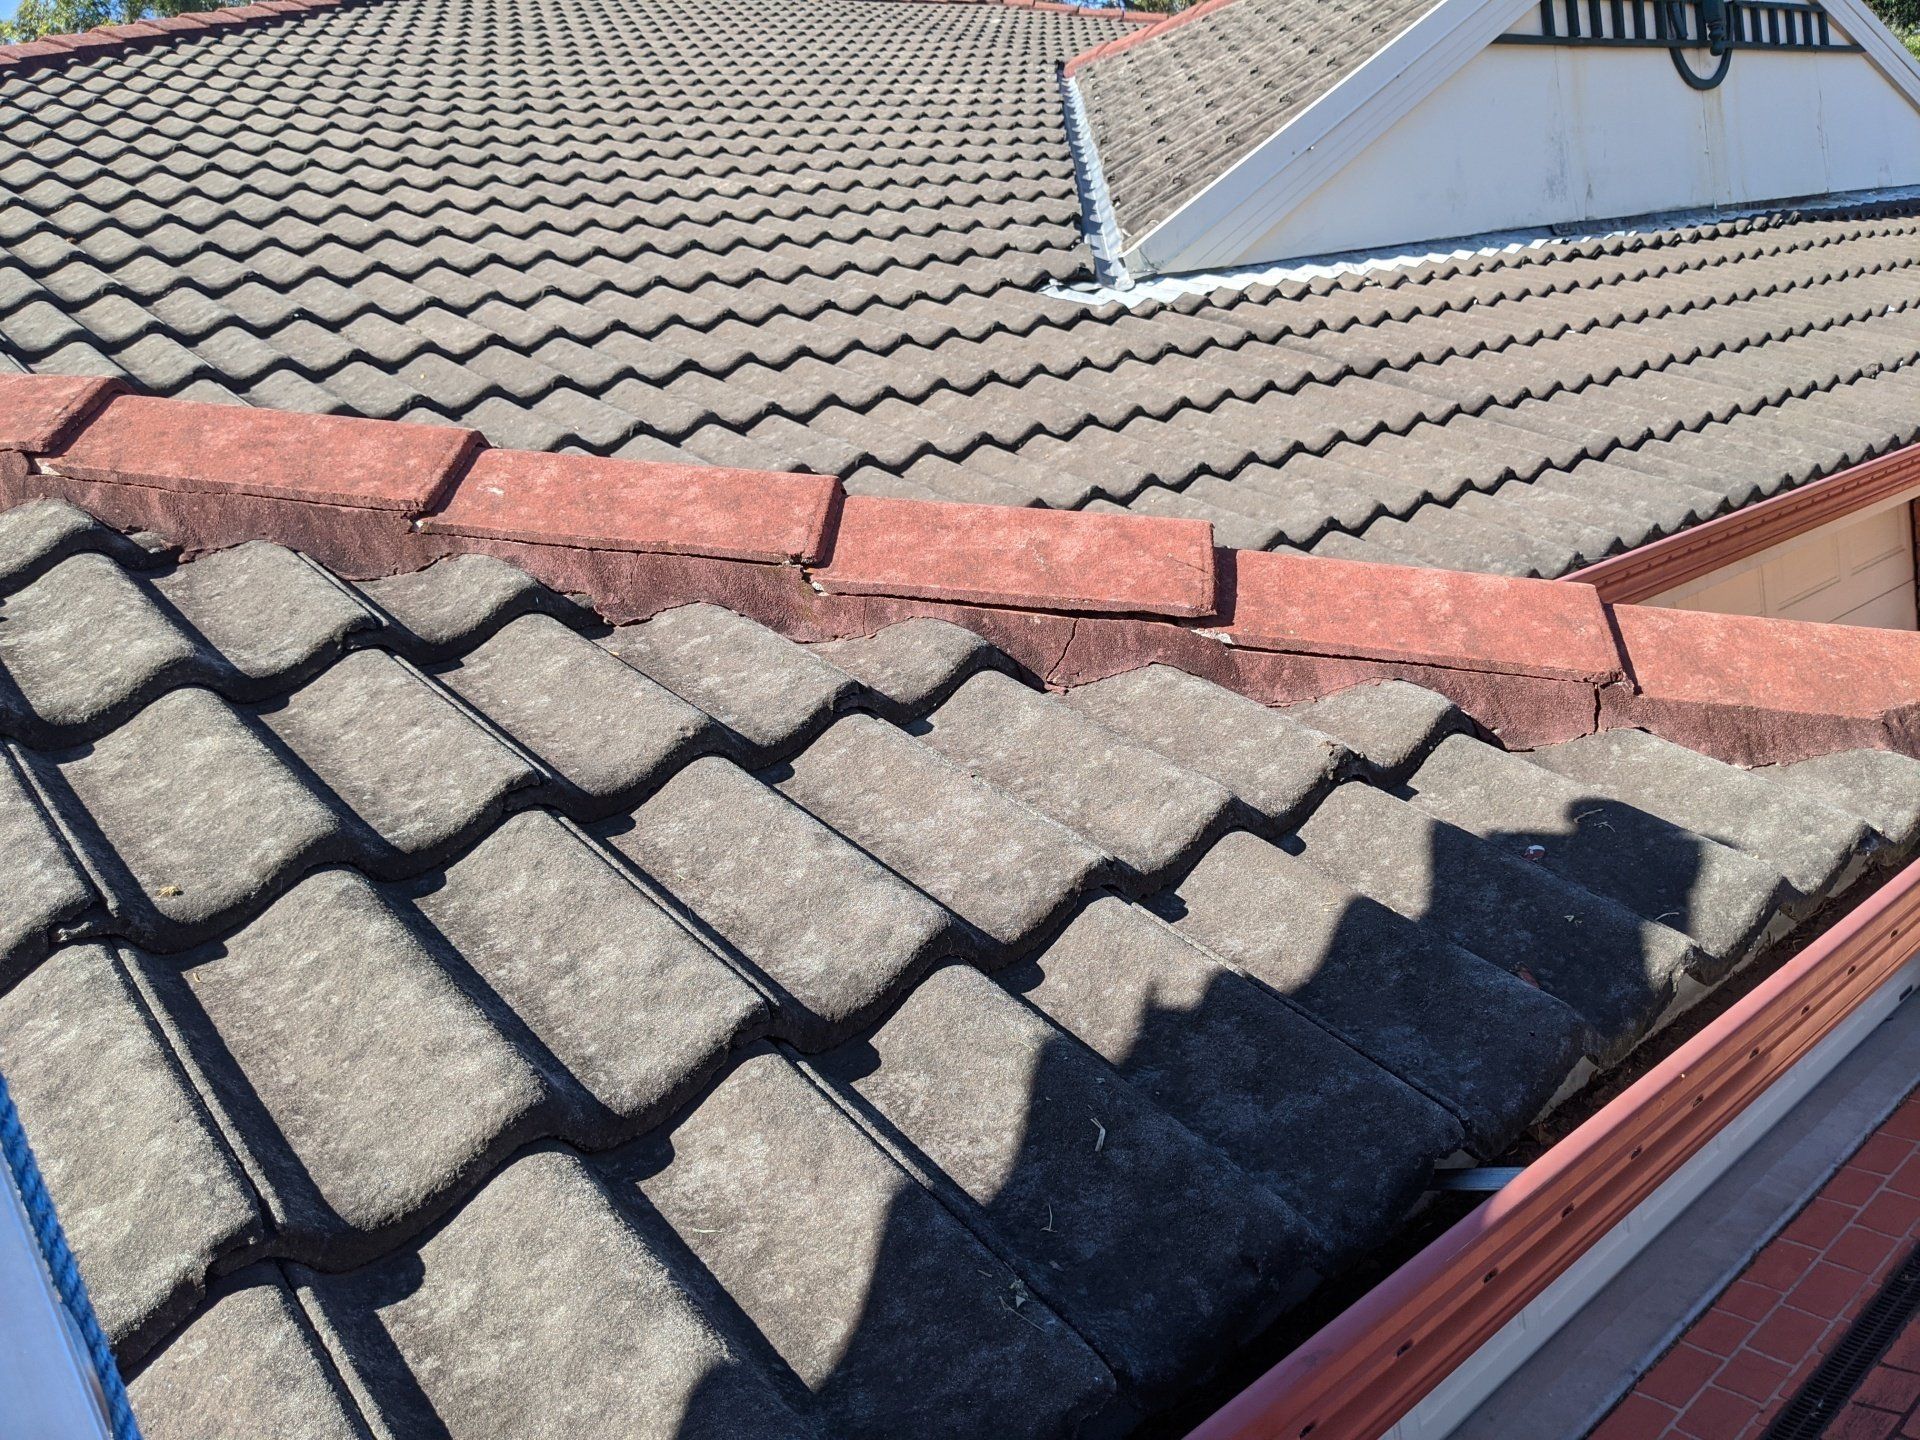 Roof with Black and Red Tiles  - Roofing Specialist in Port Stephens, NSW